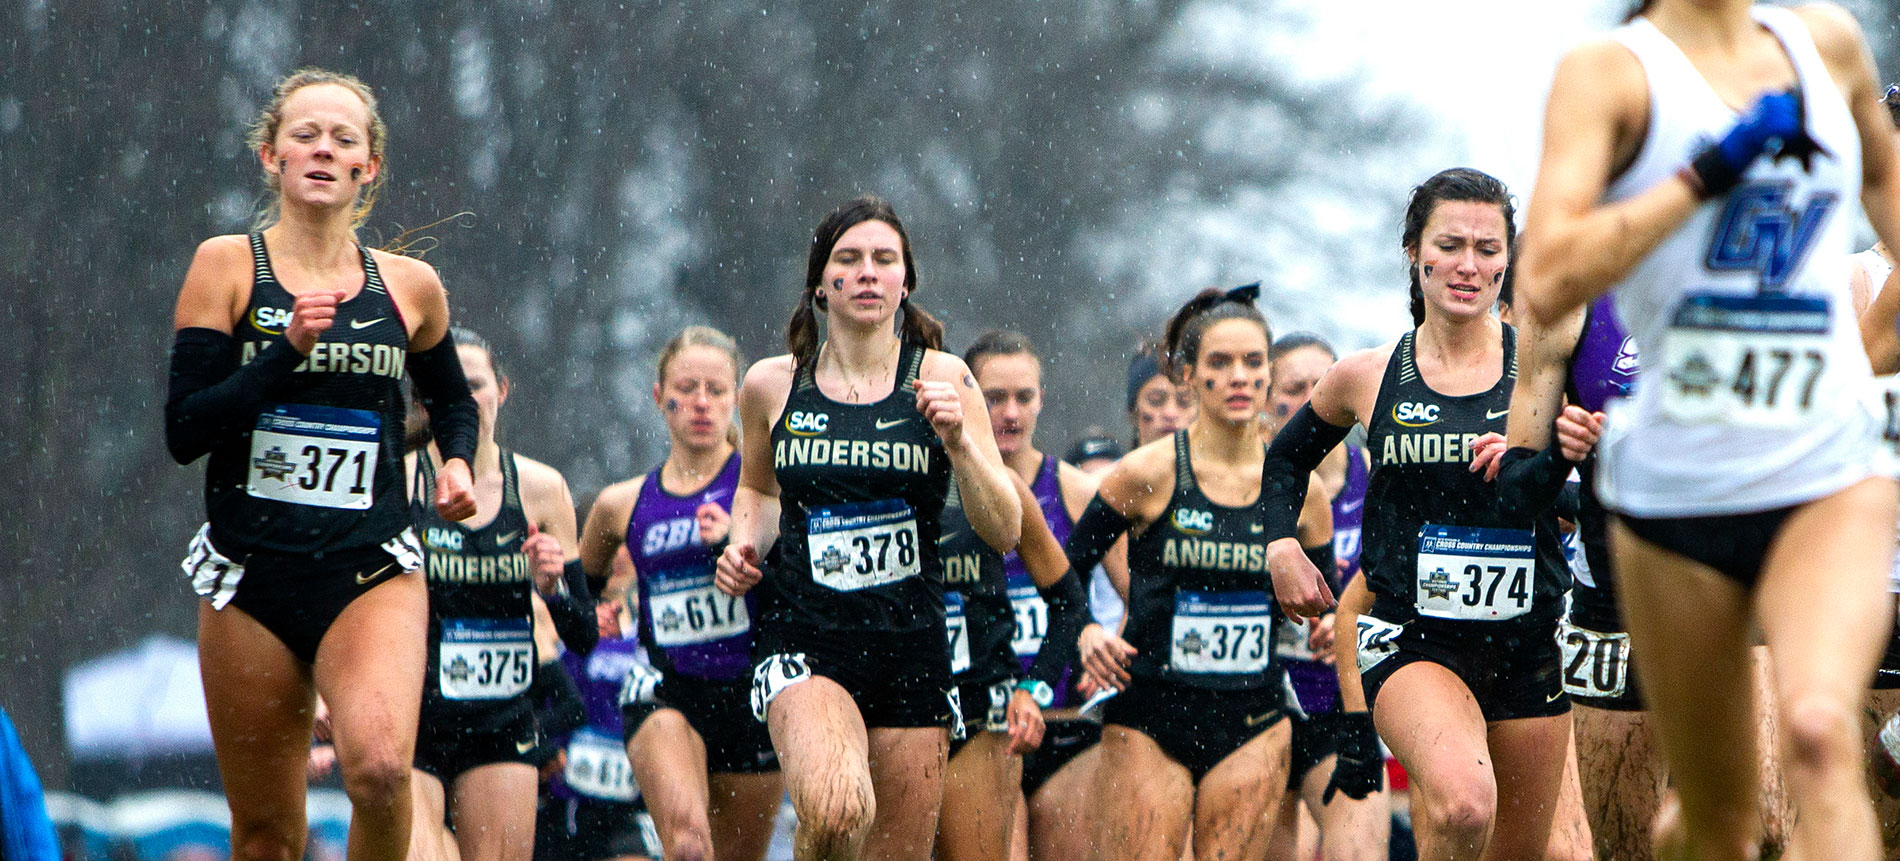 Women’s Cross Country Finishes 33rd at NCAA National Championships